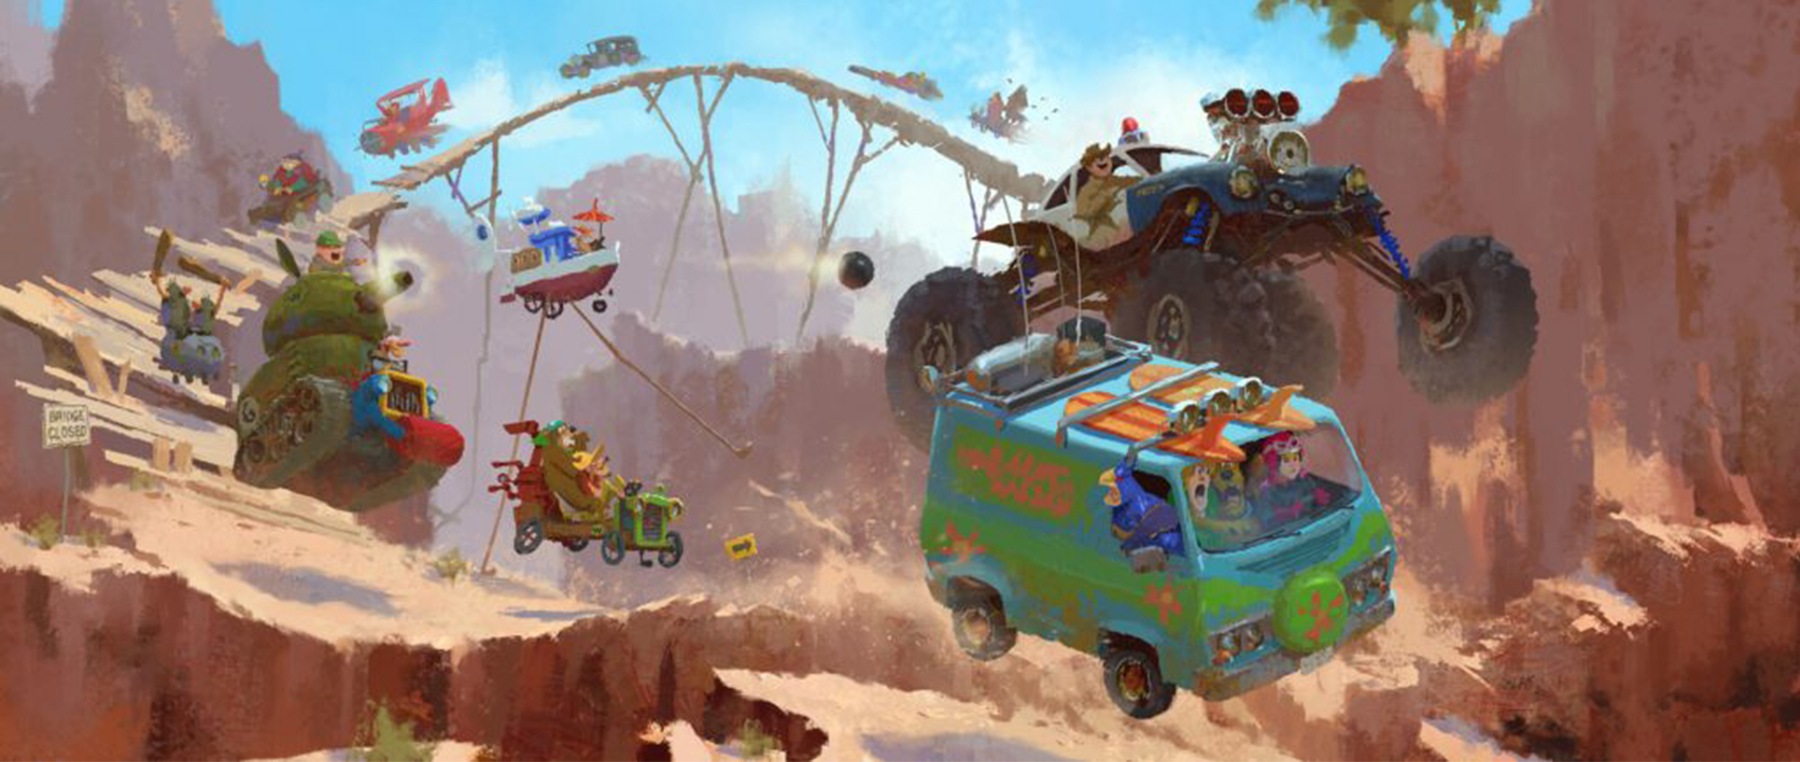 A digital painting of the Scooby-Doo Mystery Machine driving over a canyon by Zac Retz.